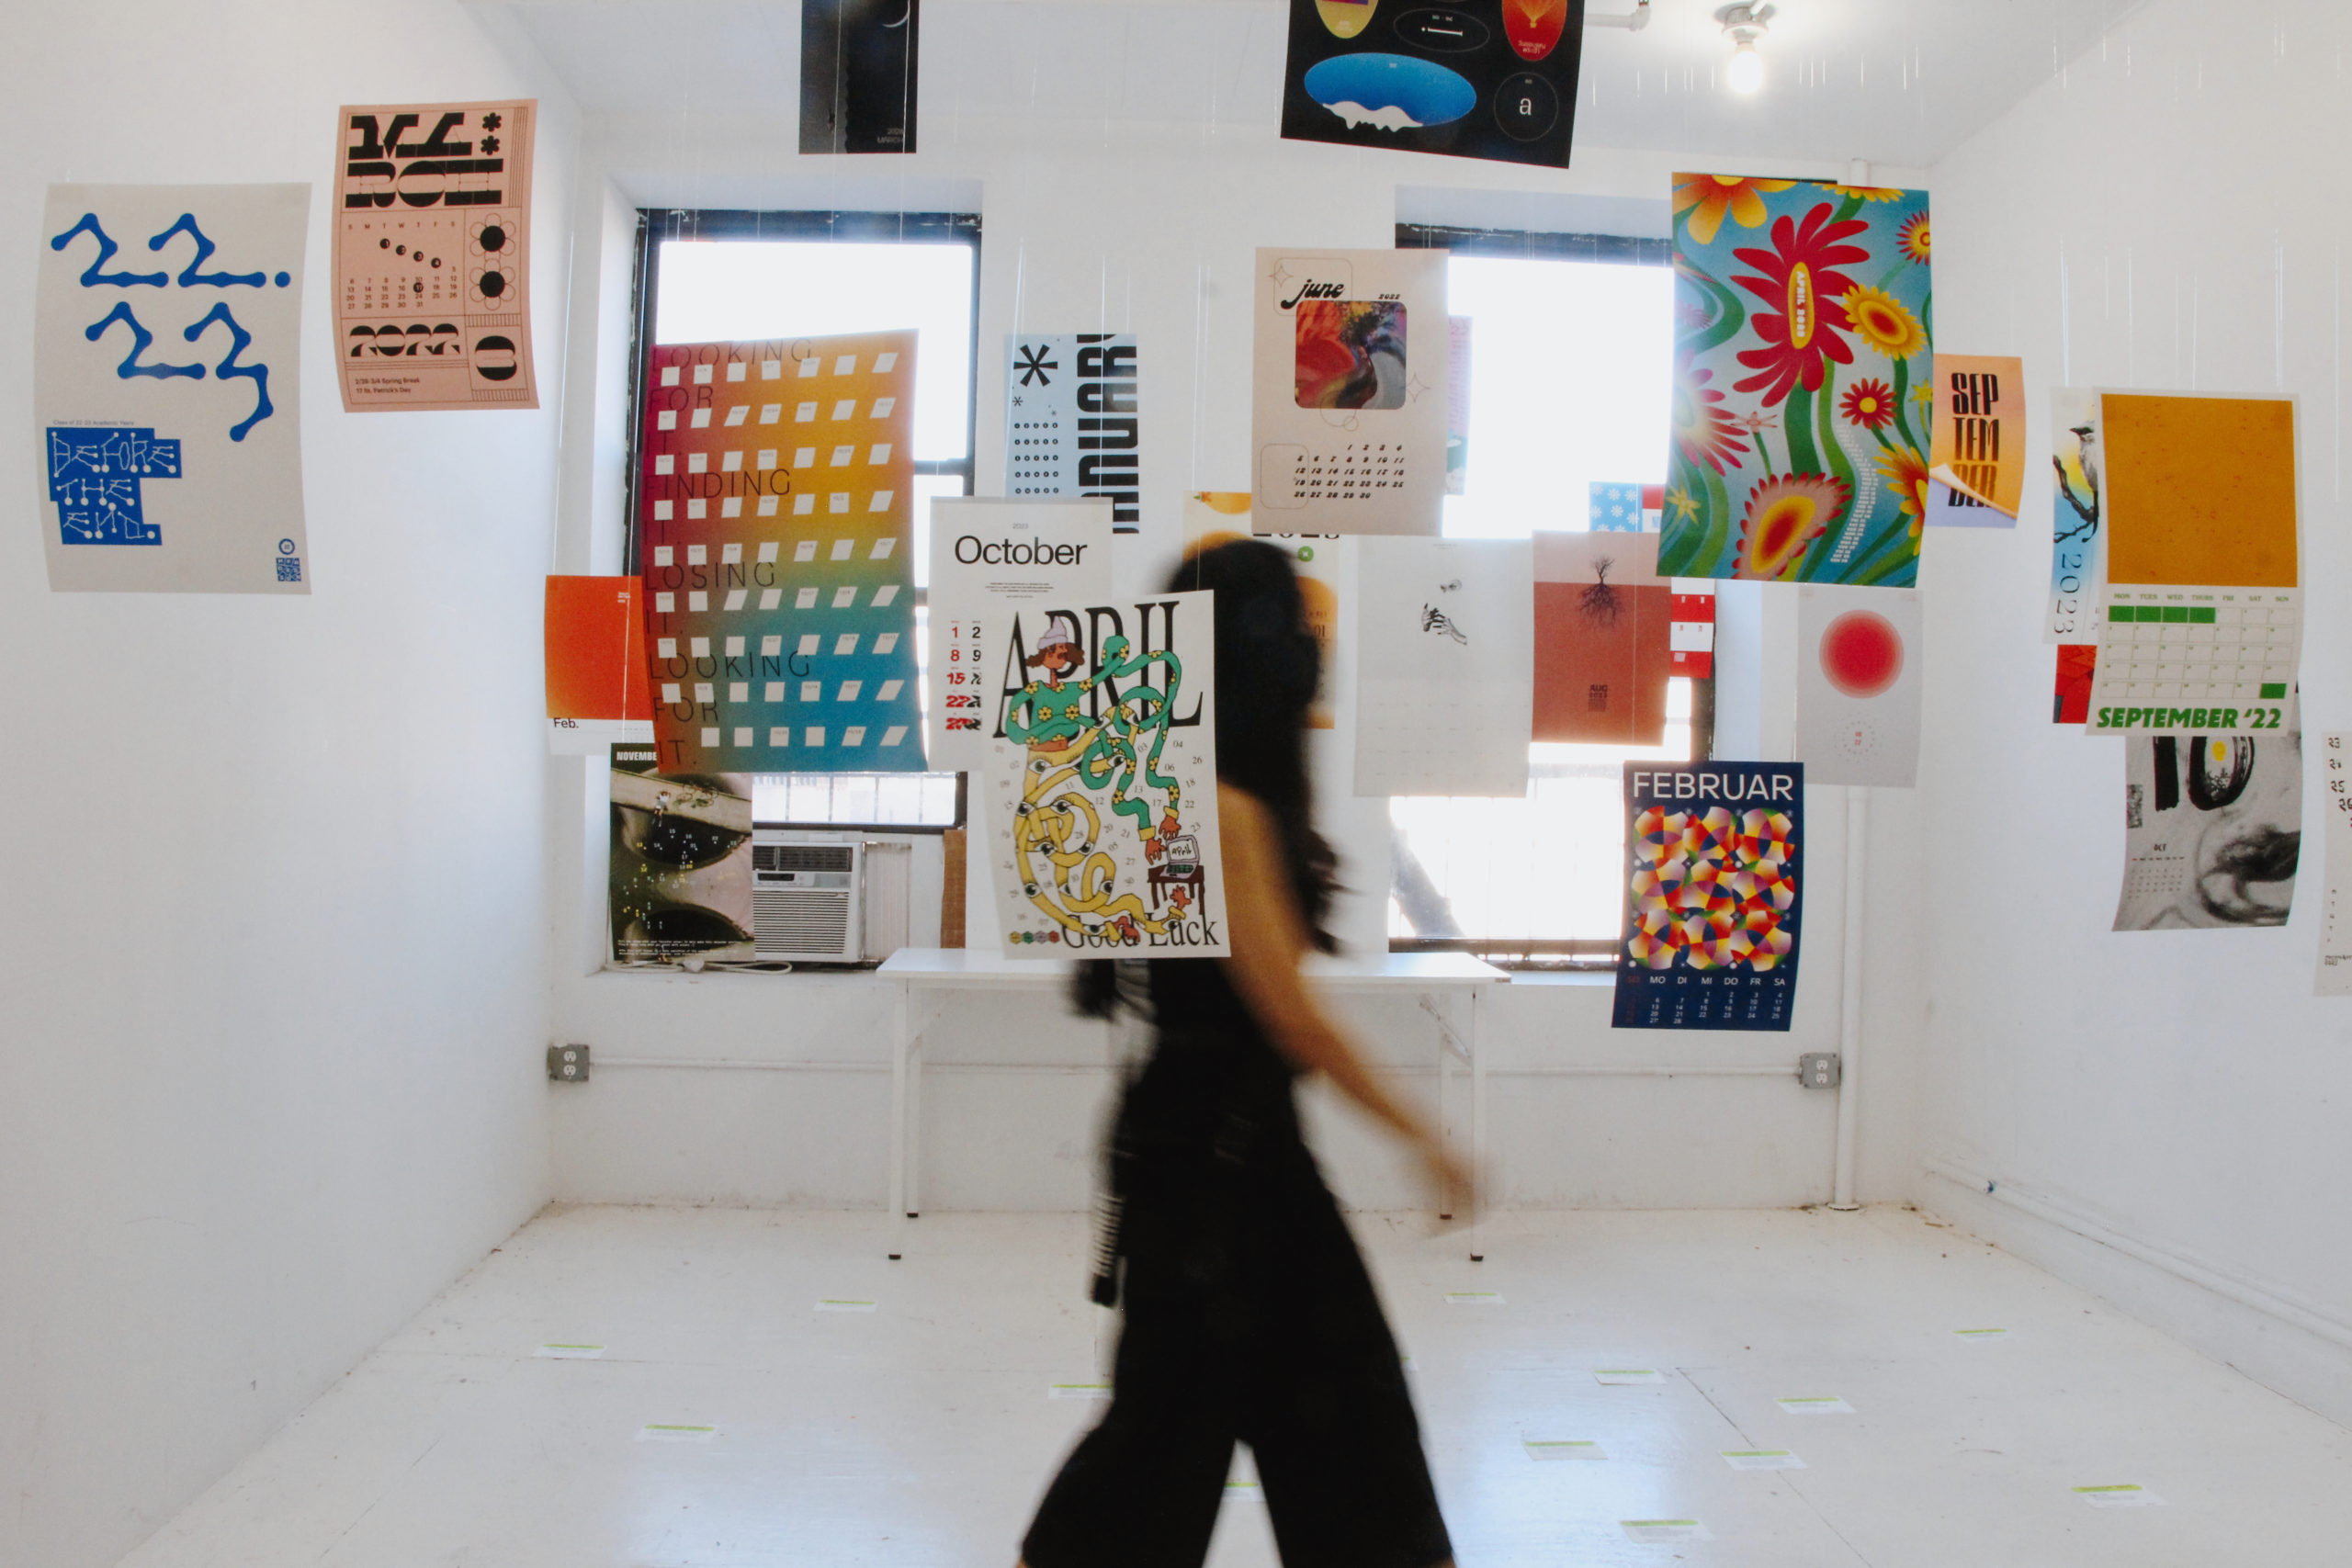 Exhibition with multiple multi-colored posters hanging from the ceiling and a person crossing the room